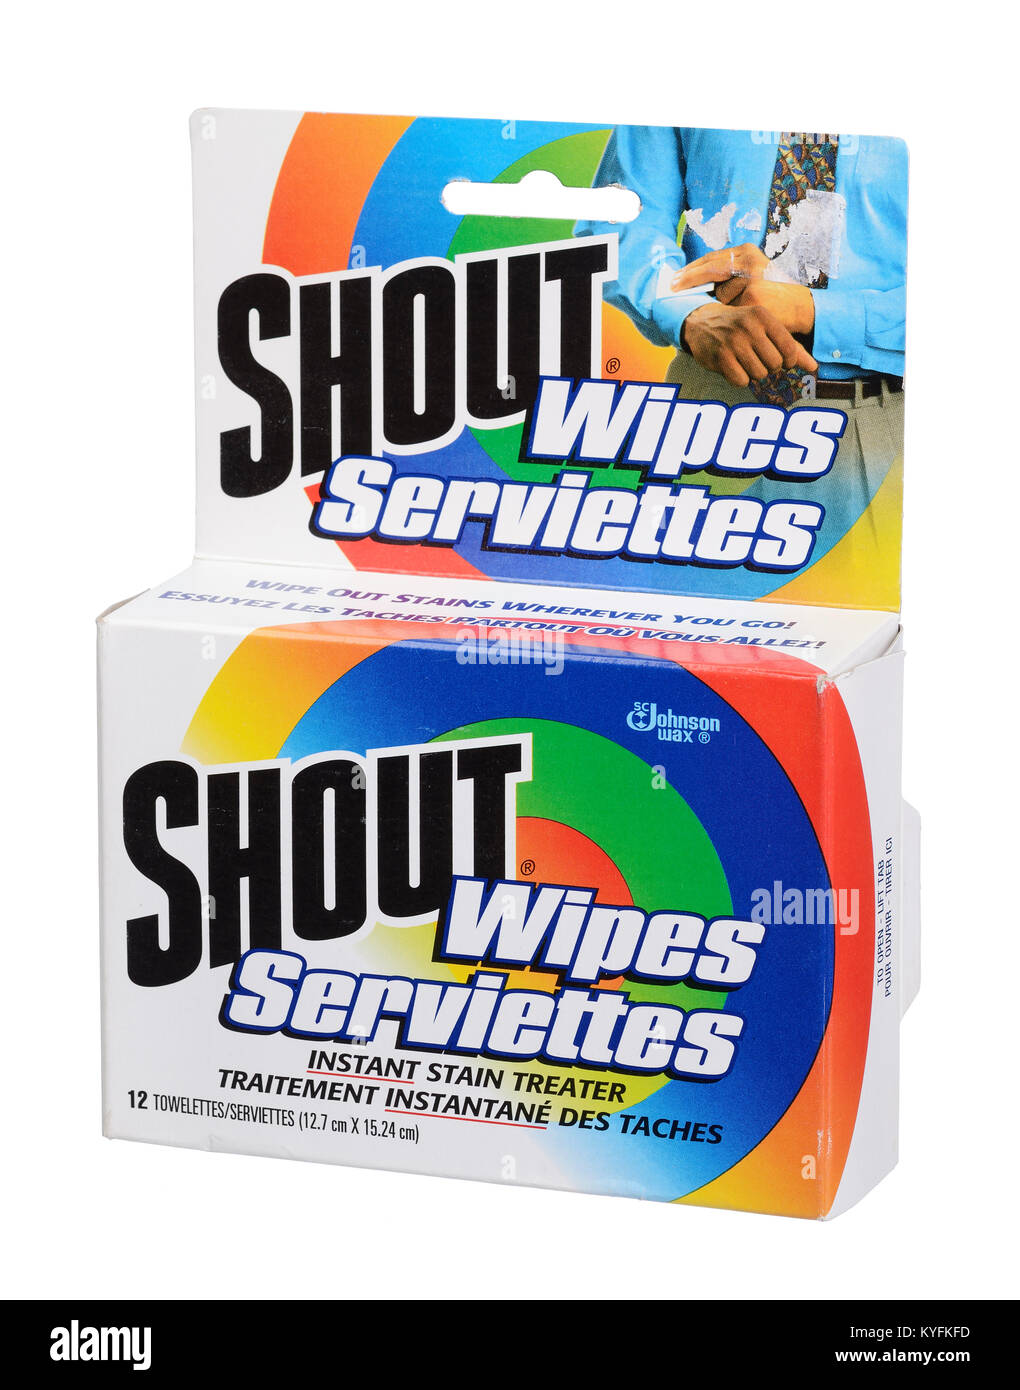 https://c8.alamy.com/comp/KYFKFD/box-of-shout-wipes-for-instant-stain-removal-KYFKFD.jpg